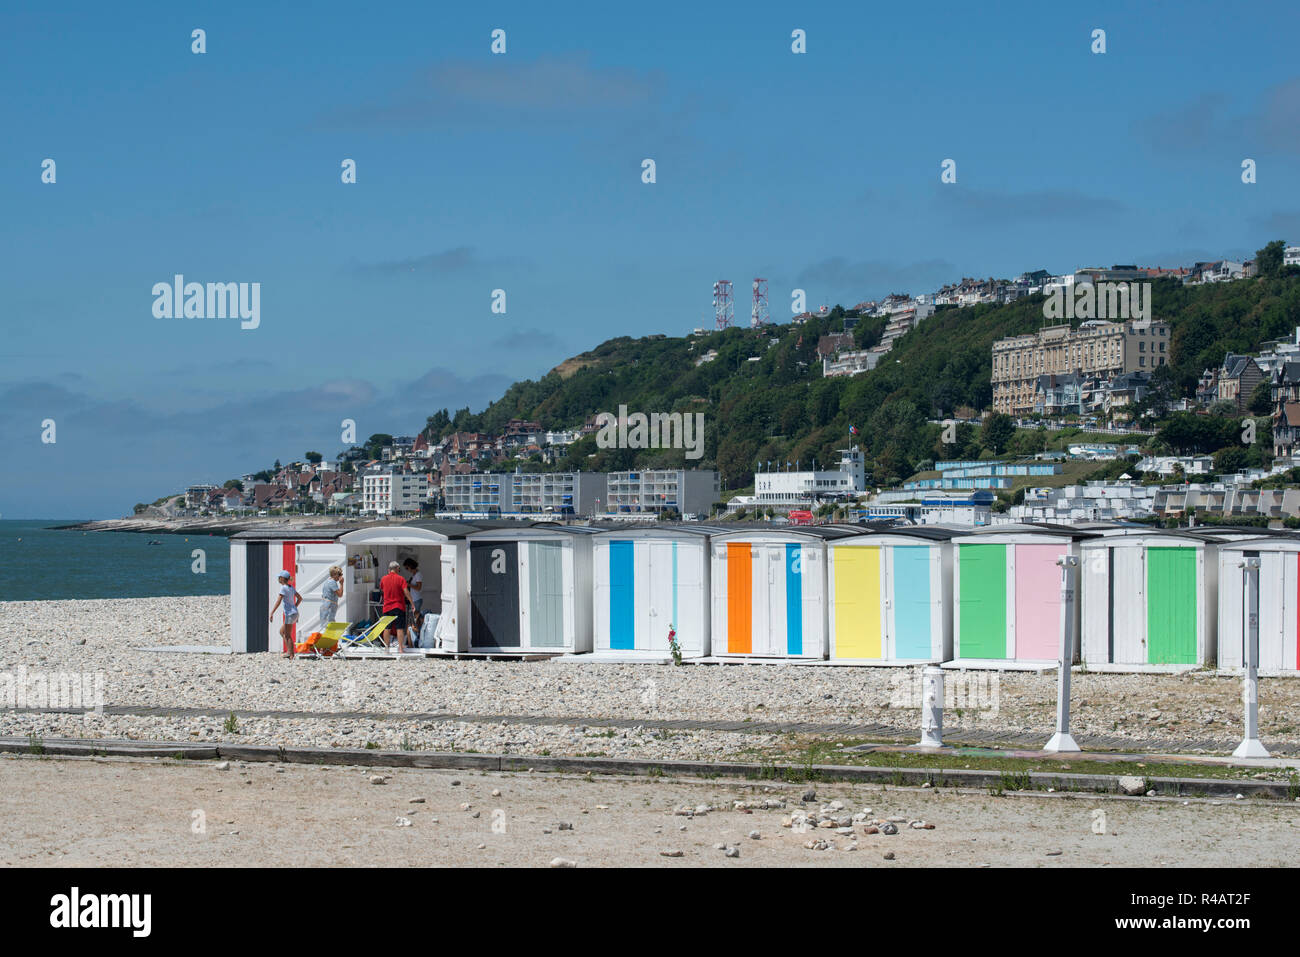 Le Havre (Normandy, north western France): beach huts on the pebble beach painted by designer Karel Martens for the festivities of the cityÕs 500th an Stock Photo